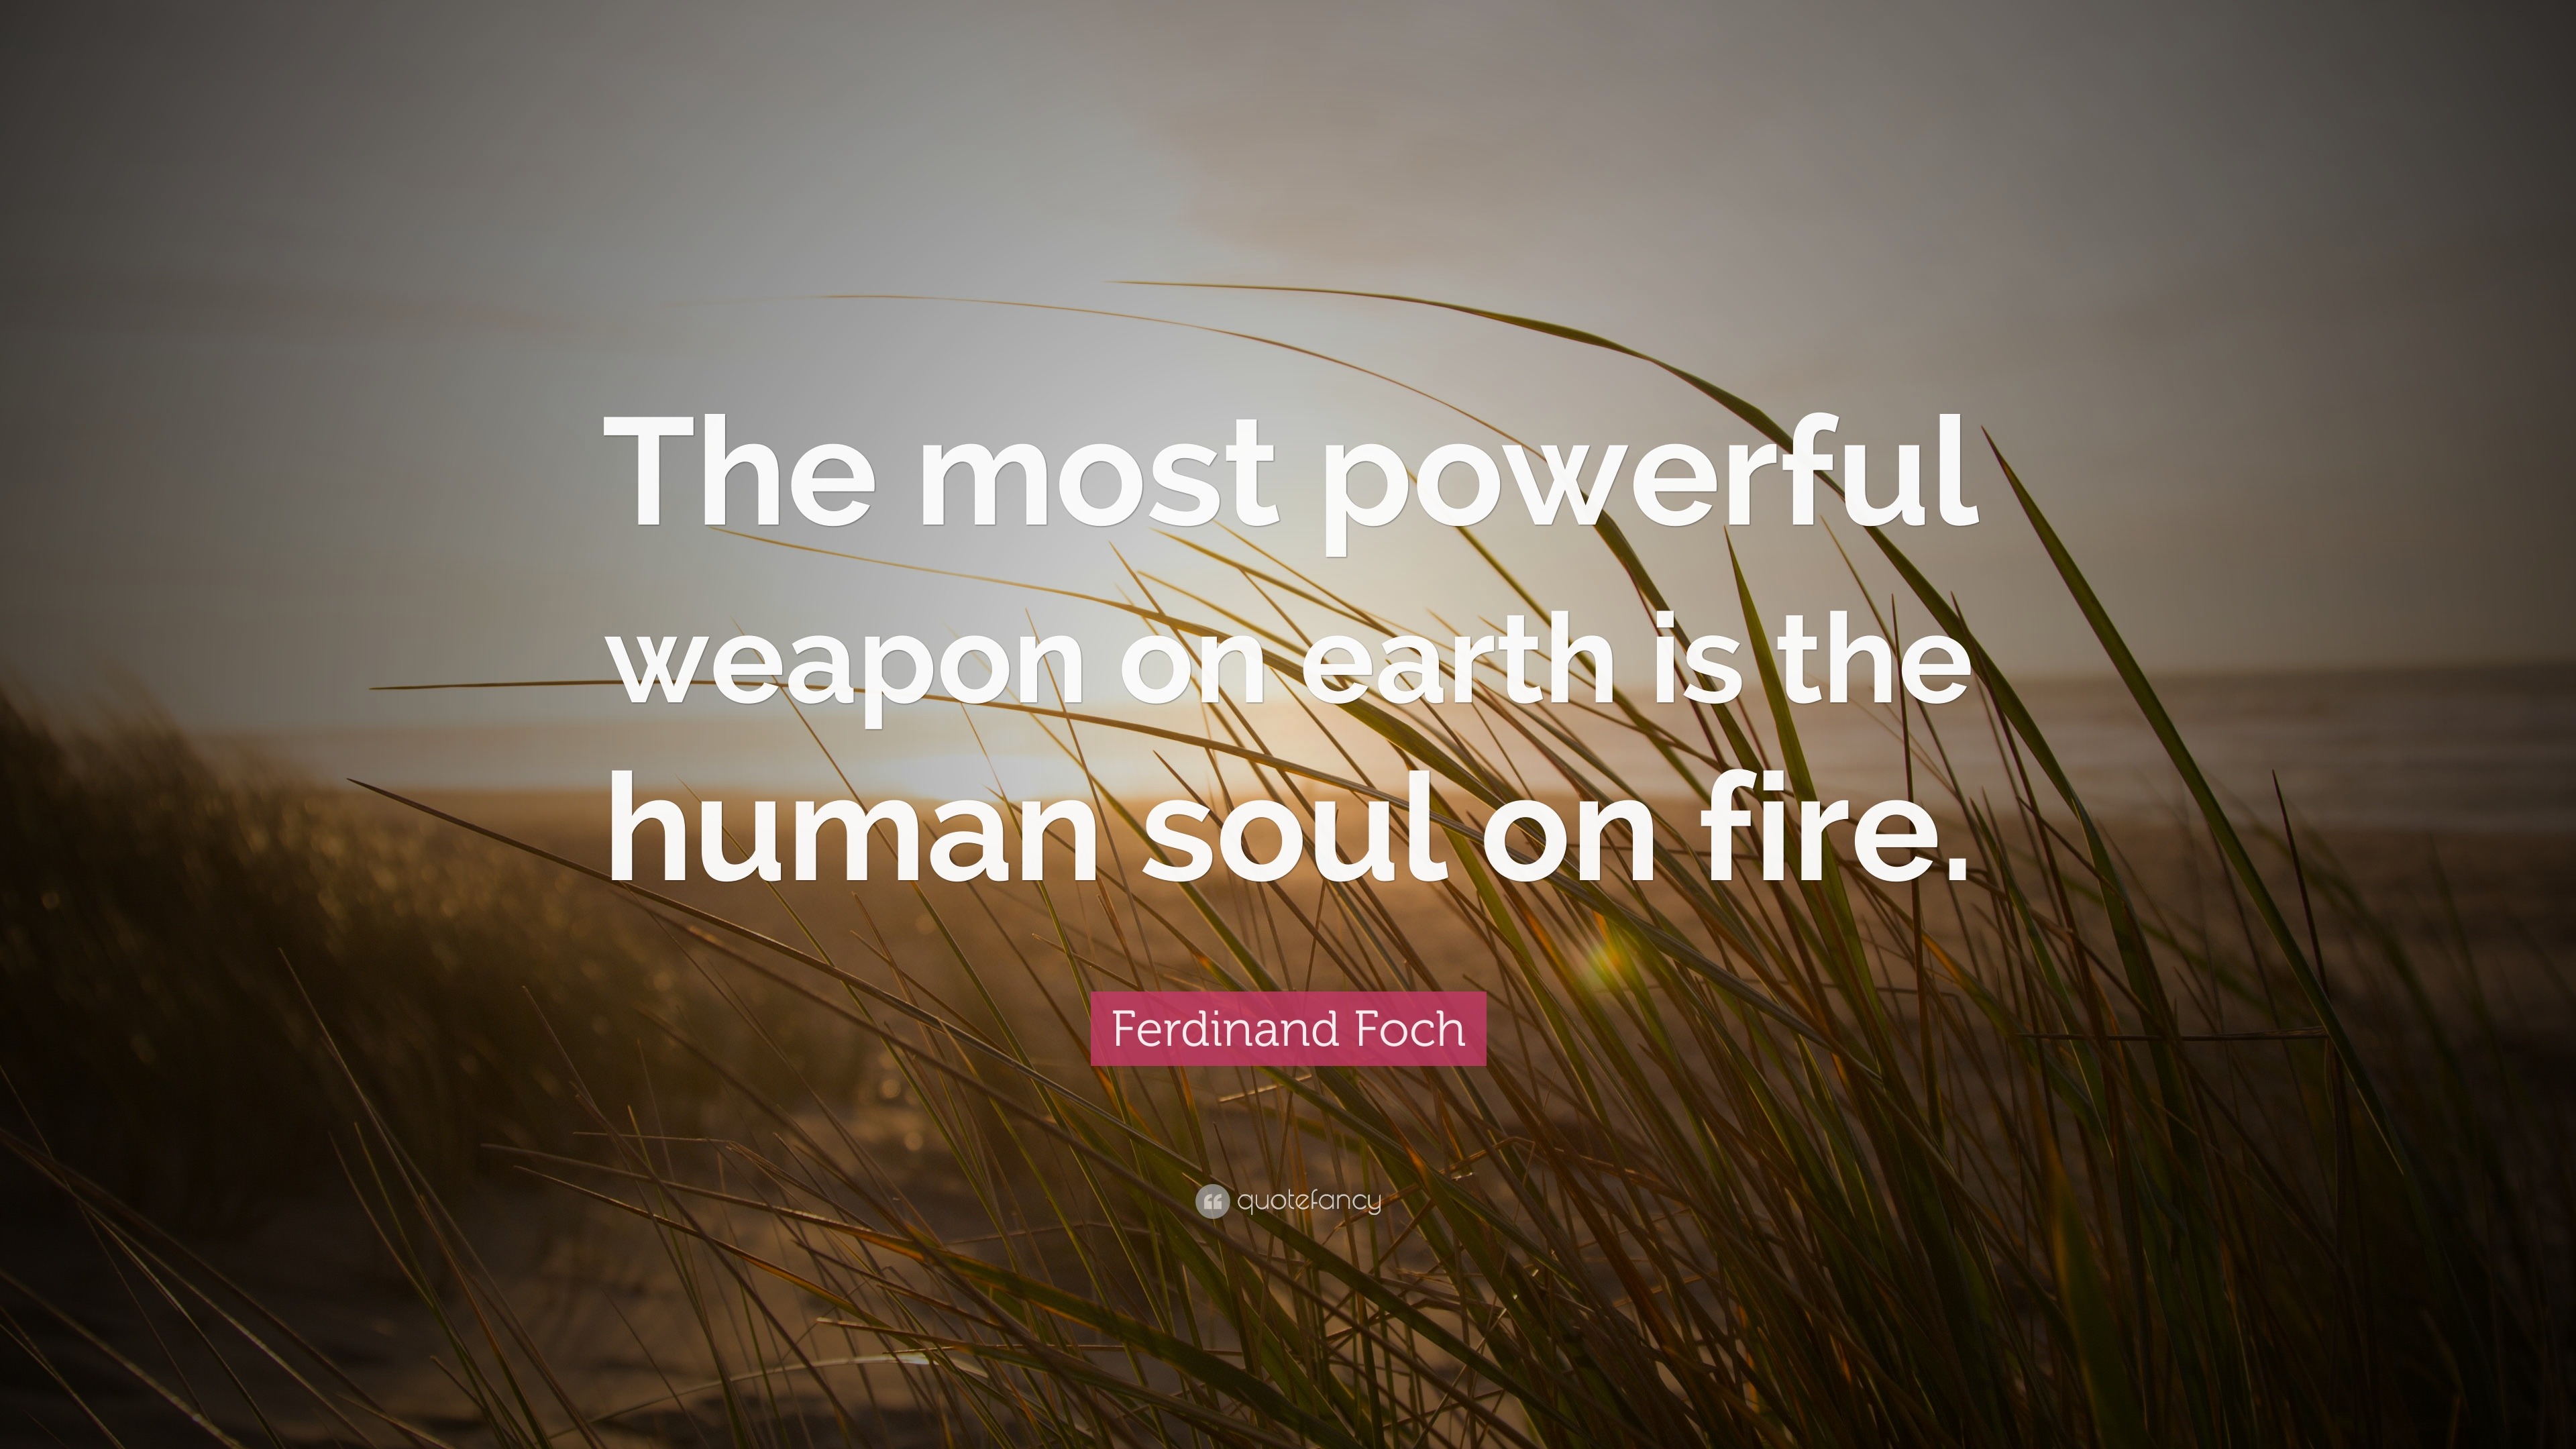 Ferdinand Foch Quote: “The most powerful weapon on earth is the human